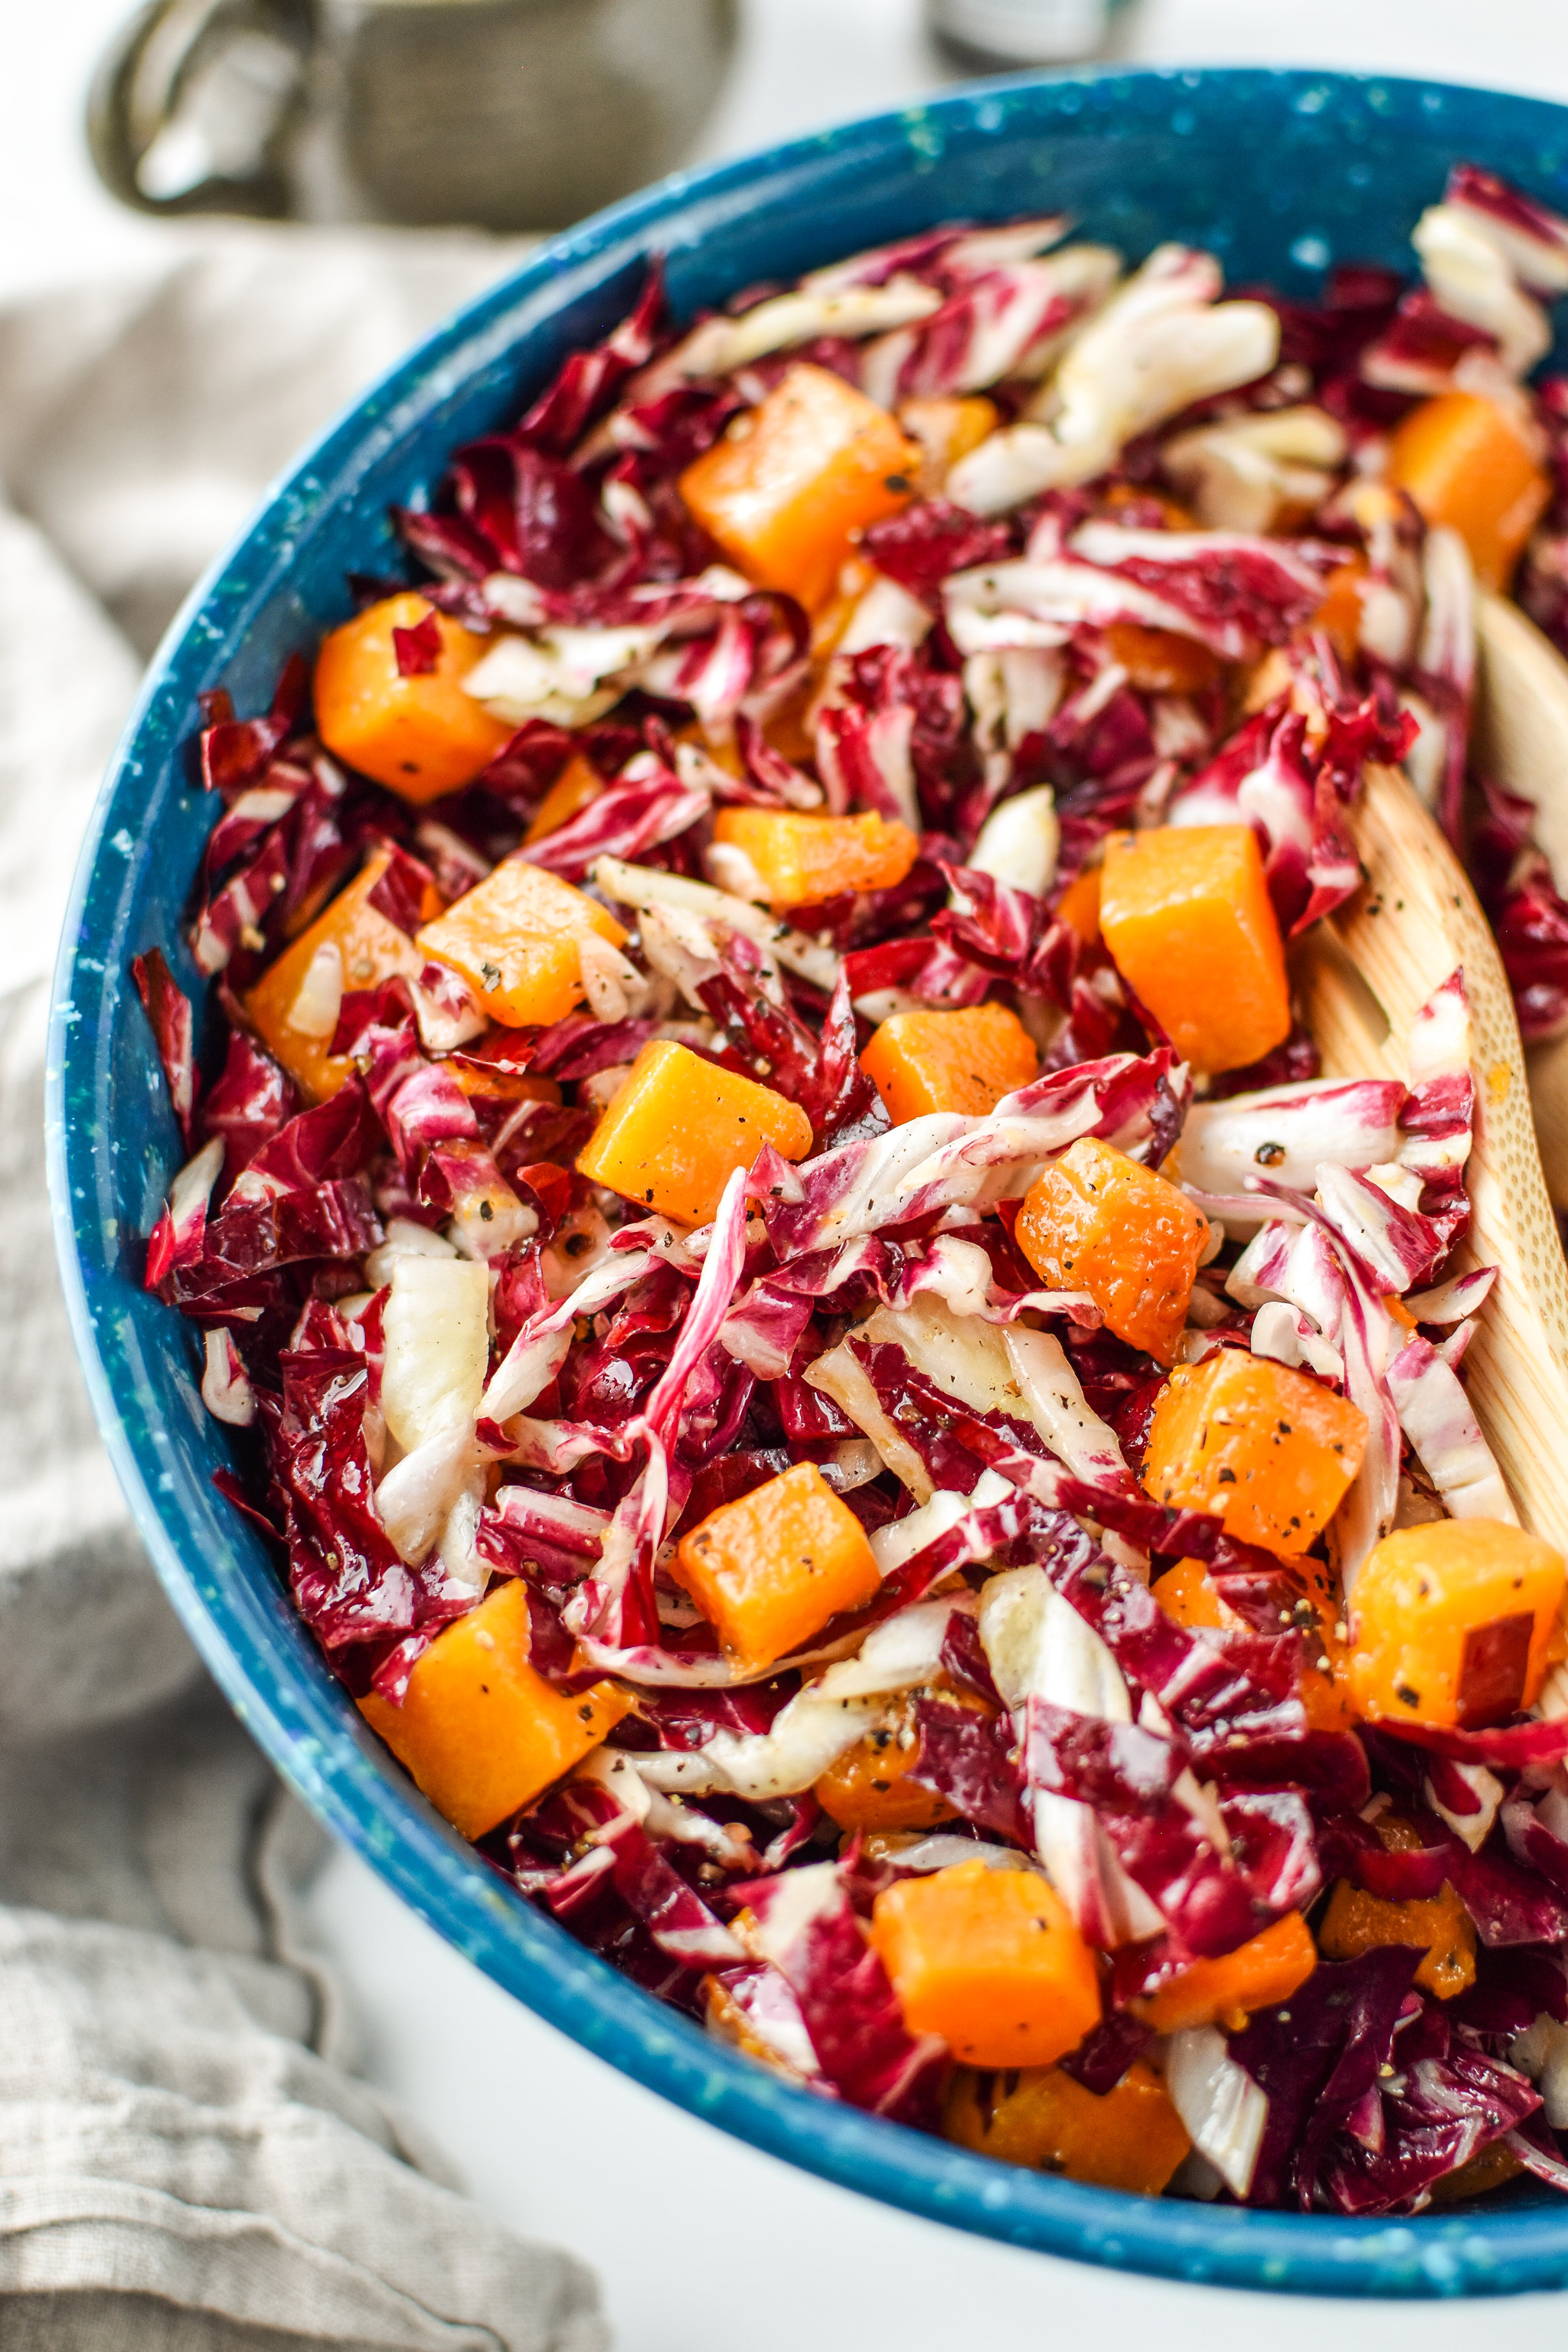 Radicchio and Roasted Squash Salad is colorful and delicious!